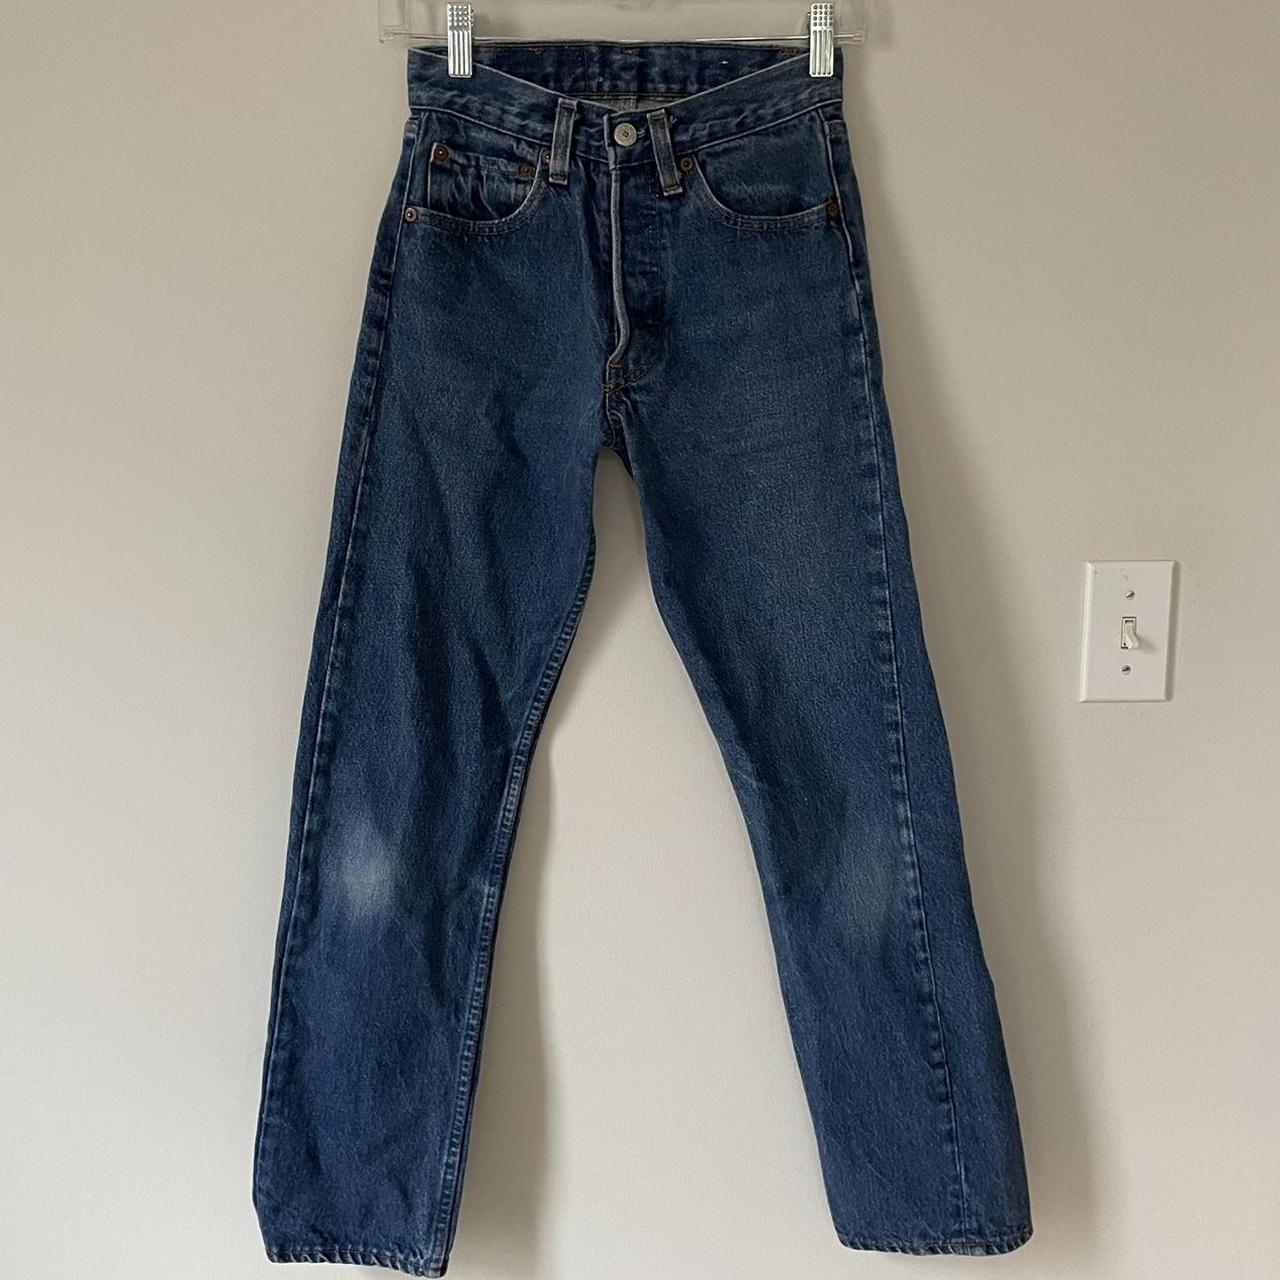 Product Image 1 - VINTAGE 1980s LEVI 501s 👖

HIGH